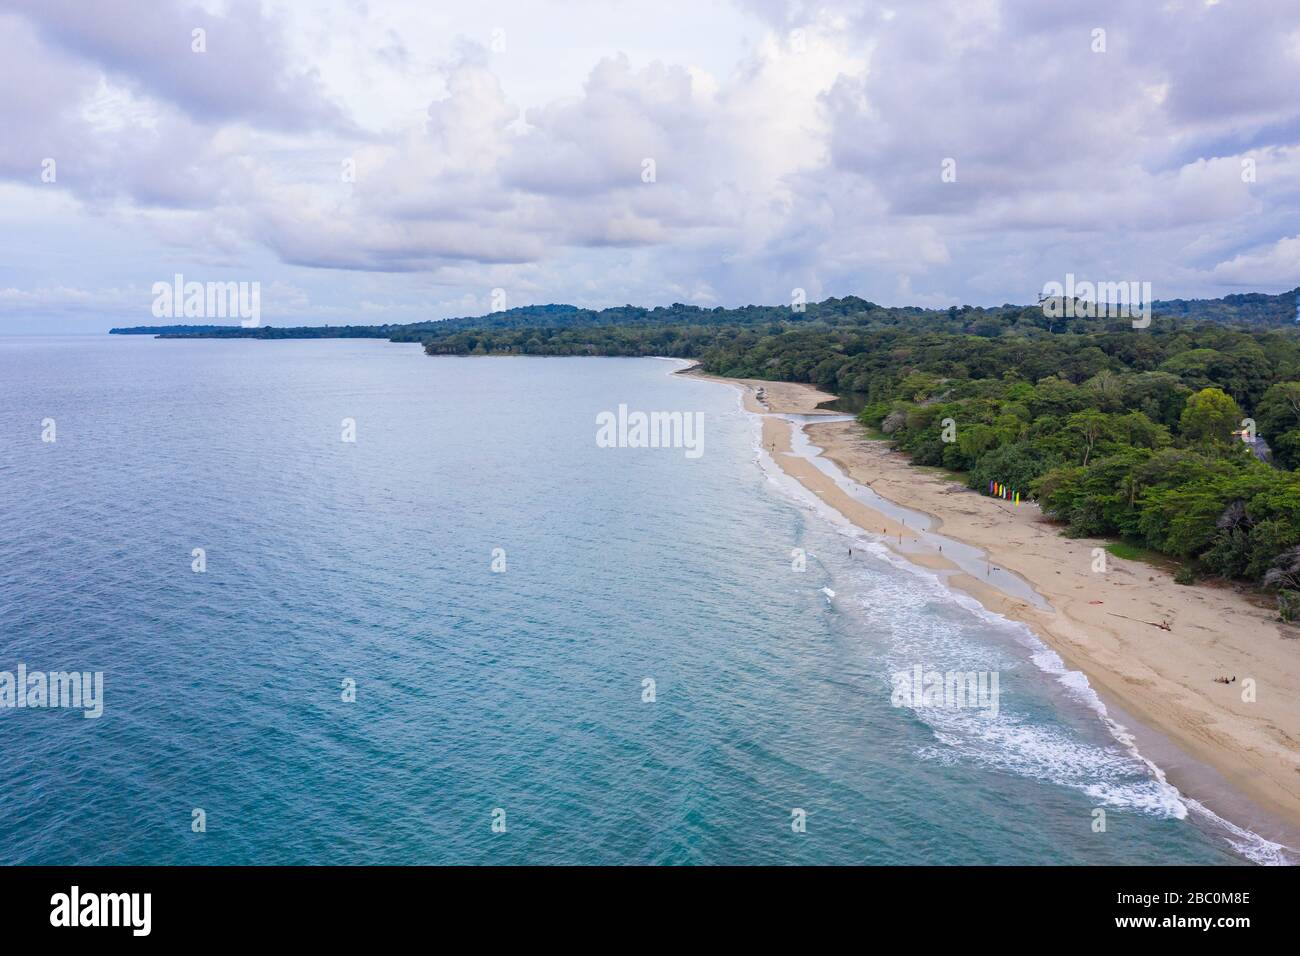 Aerial view looking south along the Caribbean coast at Puerto Viejo de Talamanca in Limón Province, Costa Rica. Stock Photo